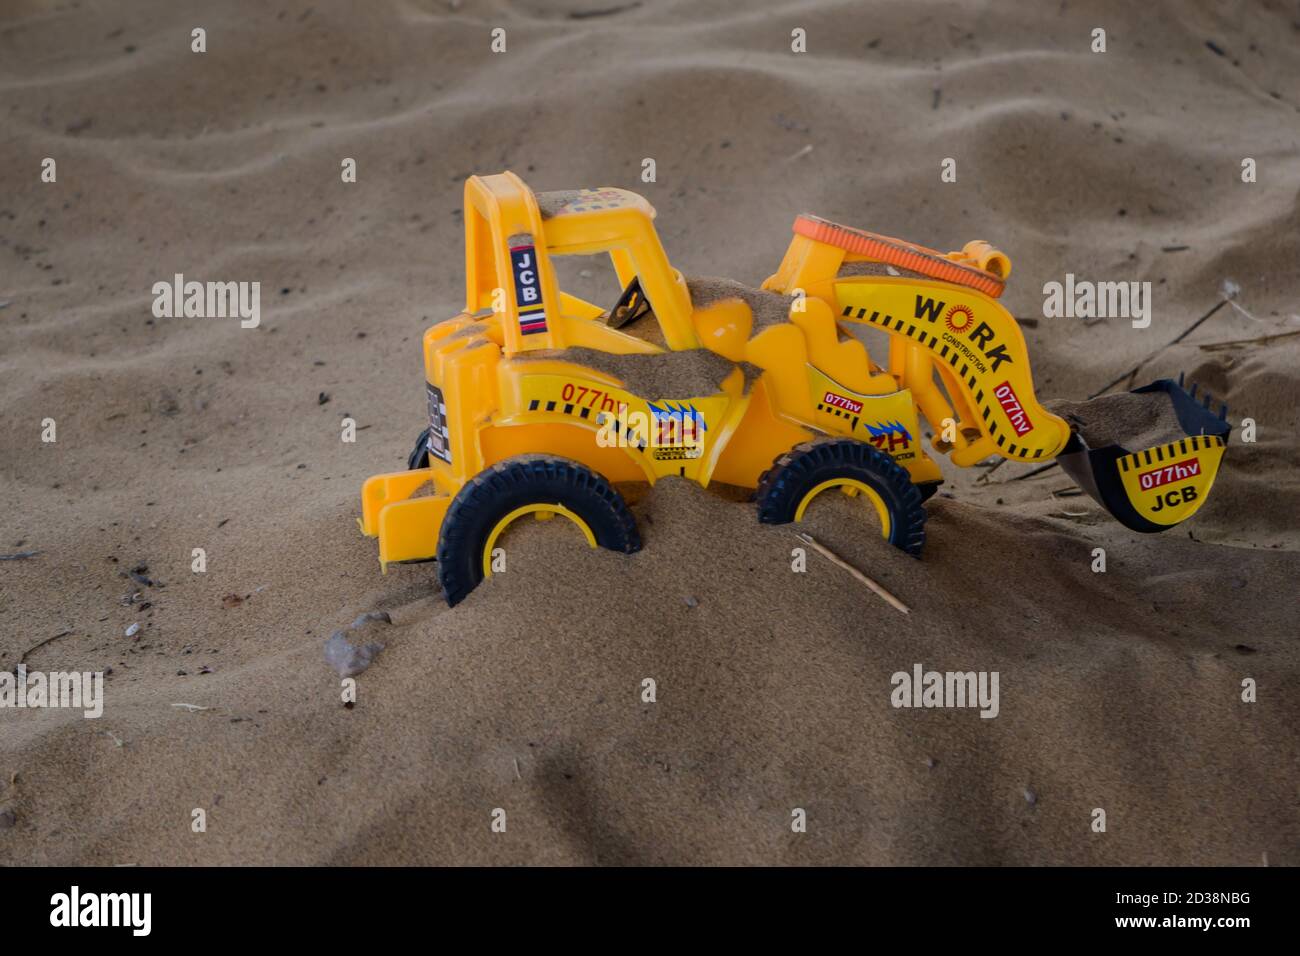 JCB Toy working on send, Construction Toys Stock Photo